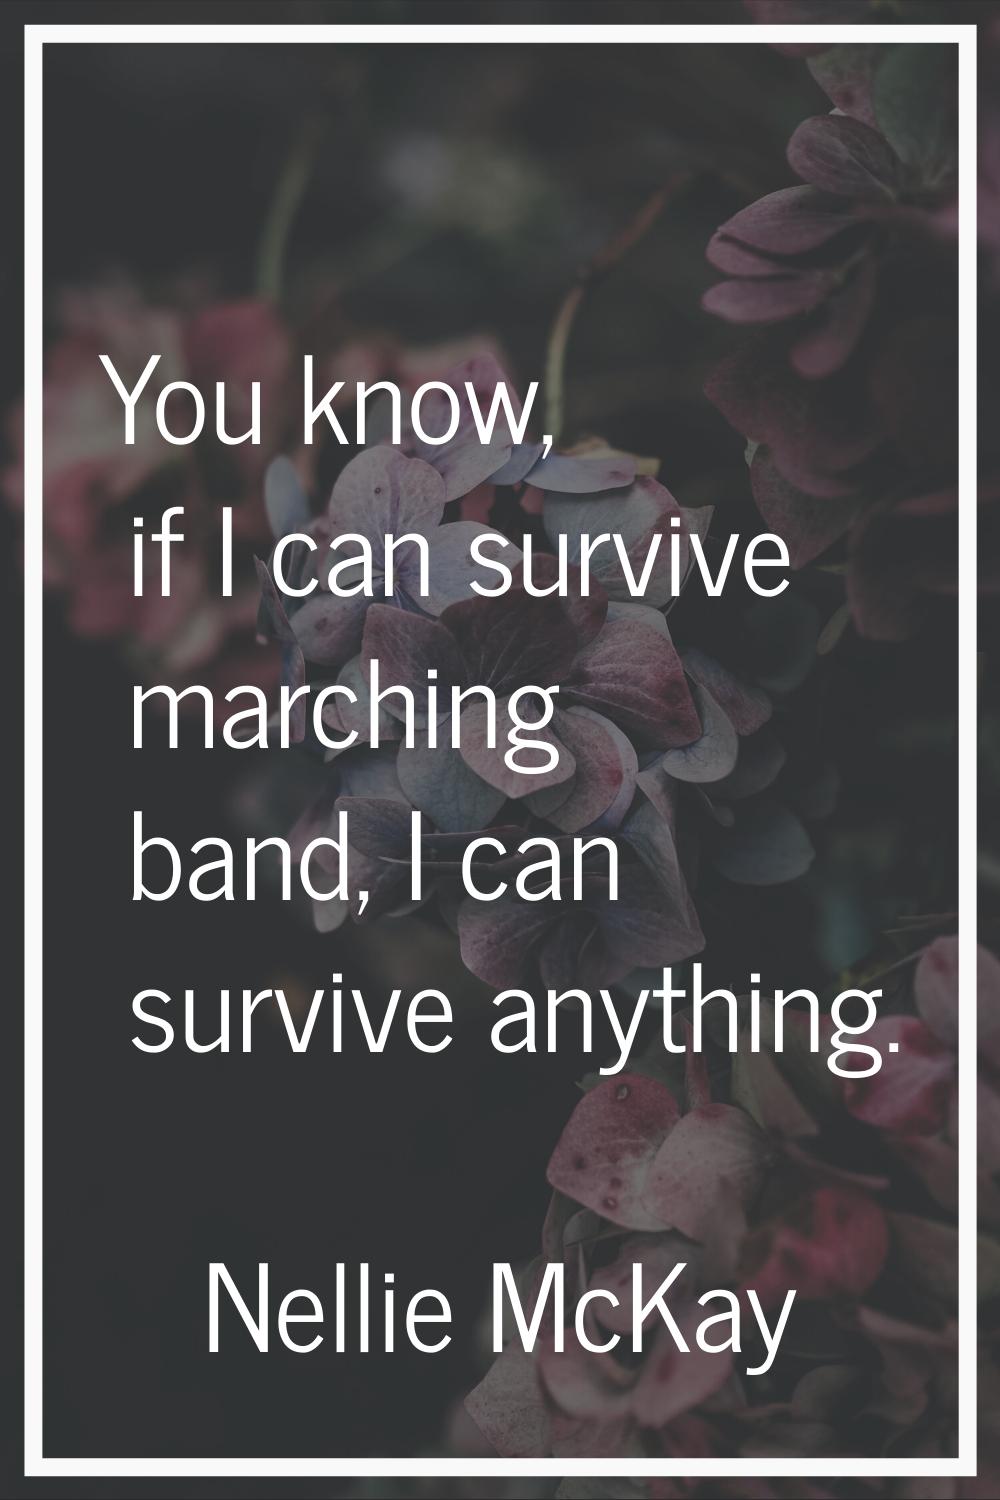 You know, if I can survive marching band, I can survive anything.